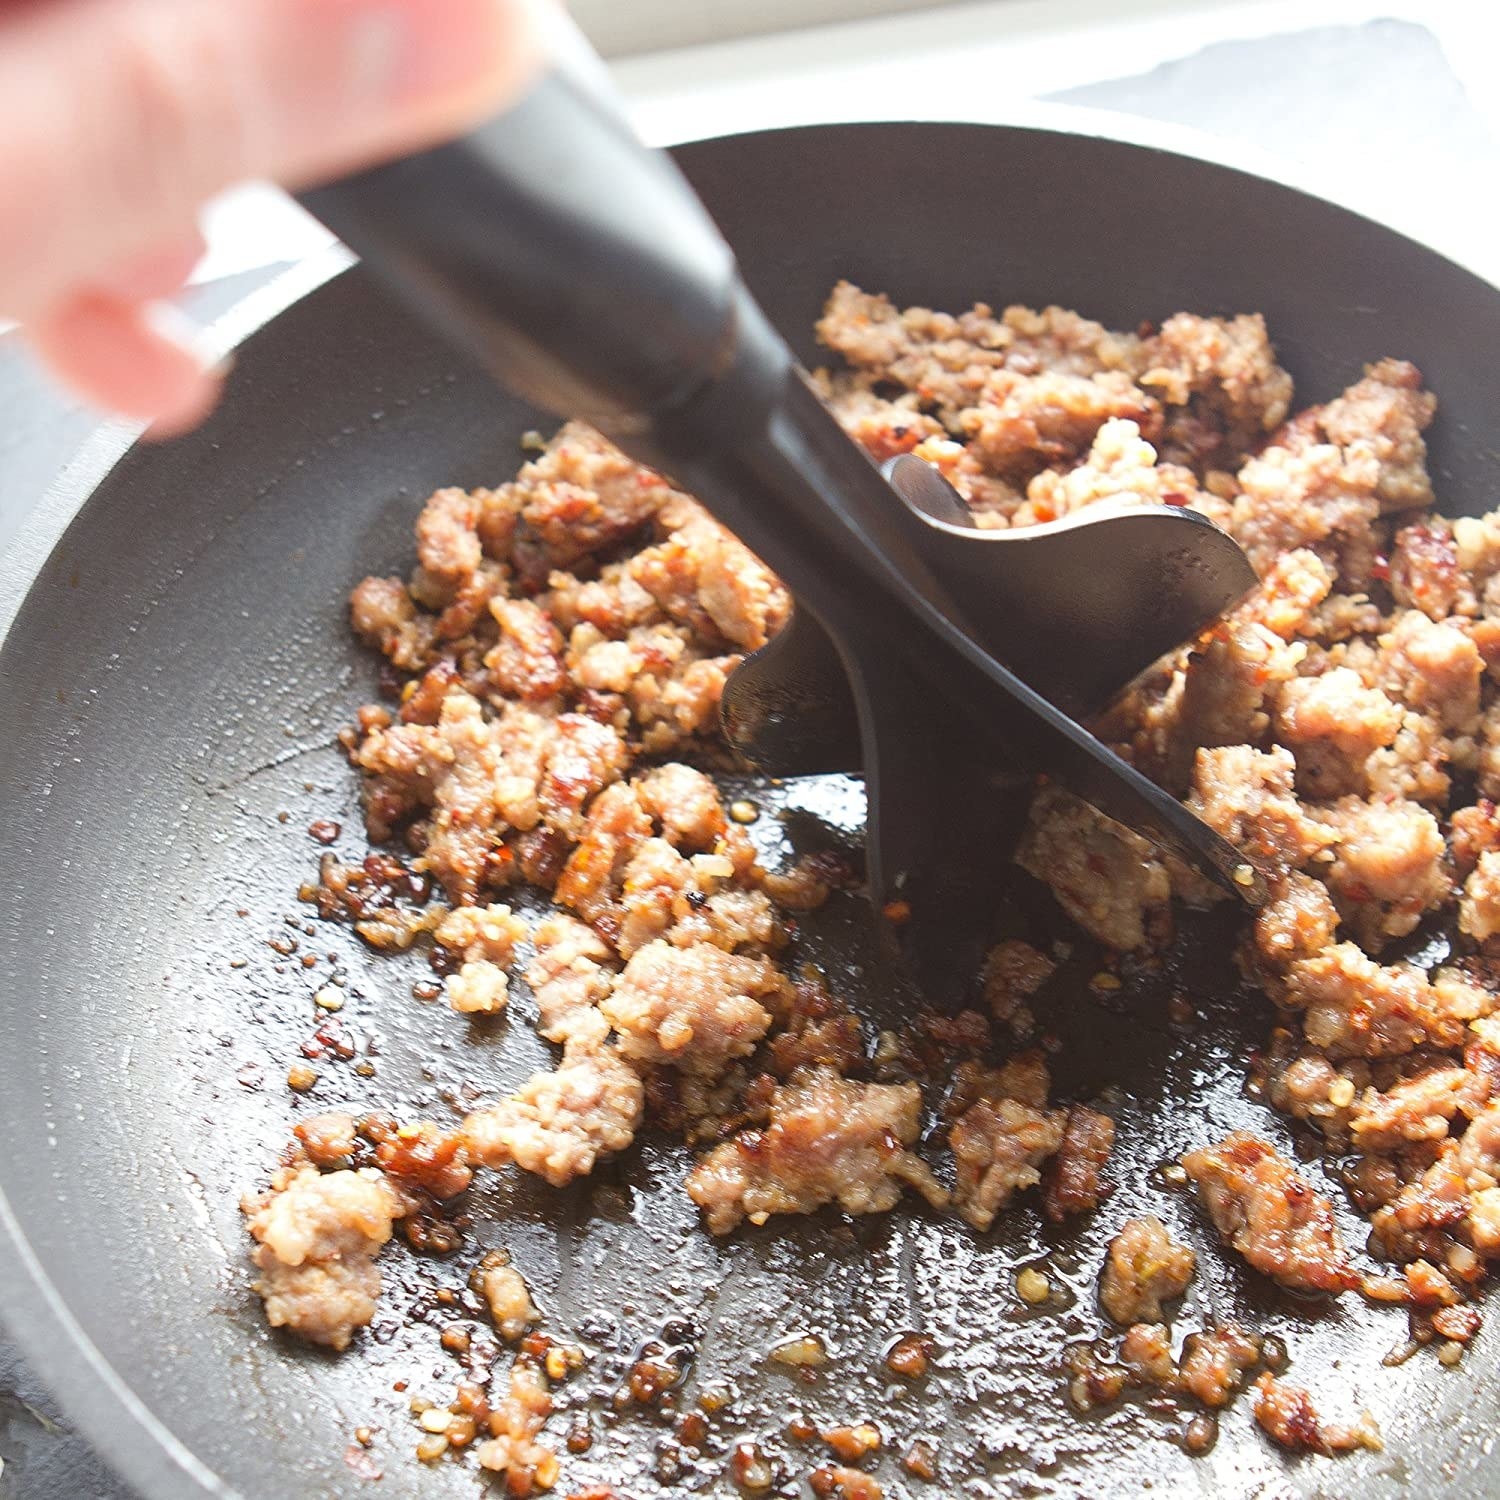 A tool breaks up ground beef in a skillet